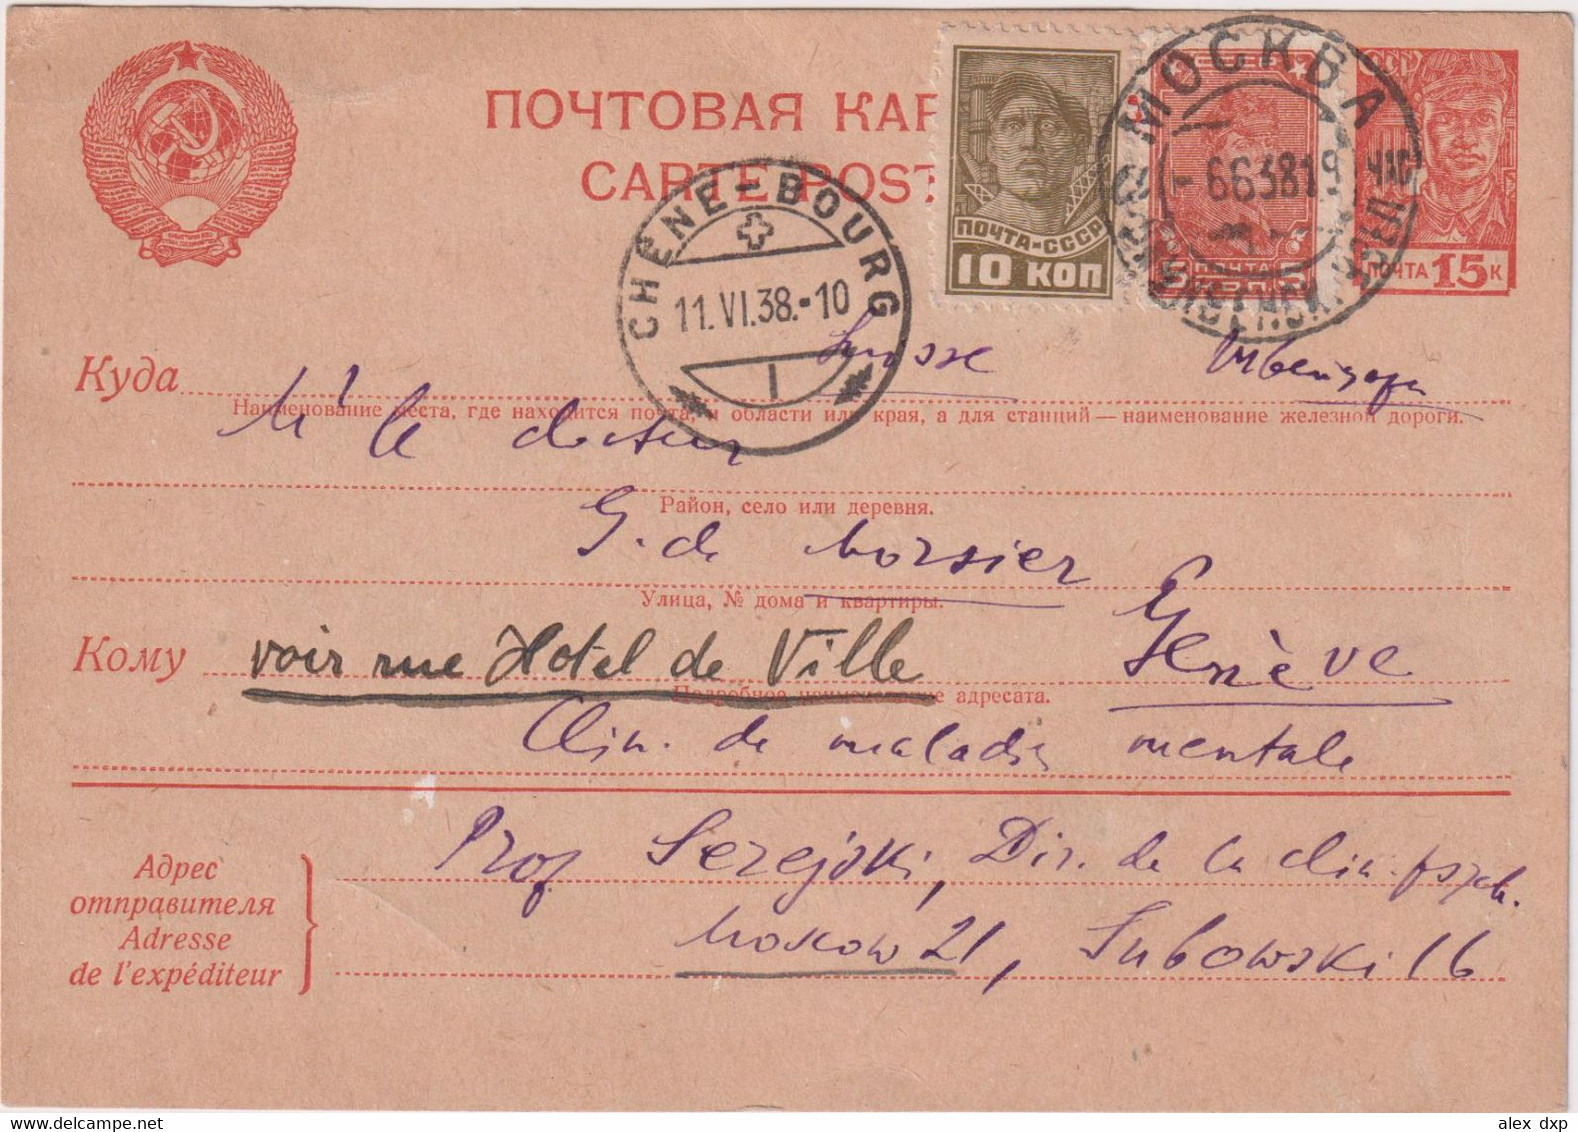 RUSSIA (USSR) > 1938 POSTAL HISTORY > POSTAL STATIONARY CARD (W/2 ADDED STAMPS) FROM MOSCOW TO GENEVE. SWITZERLAND - Covers & Documents